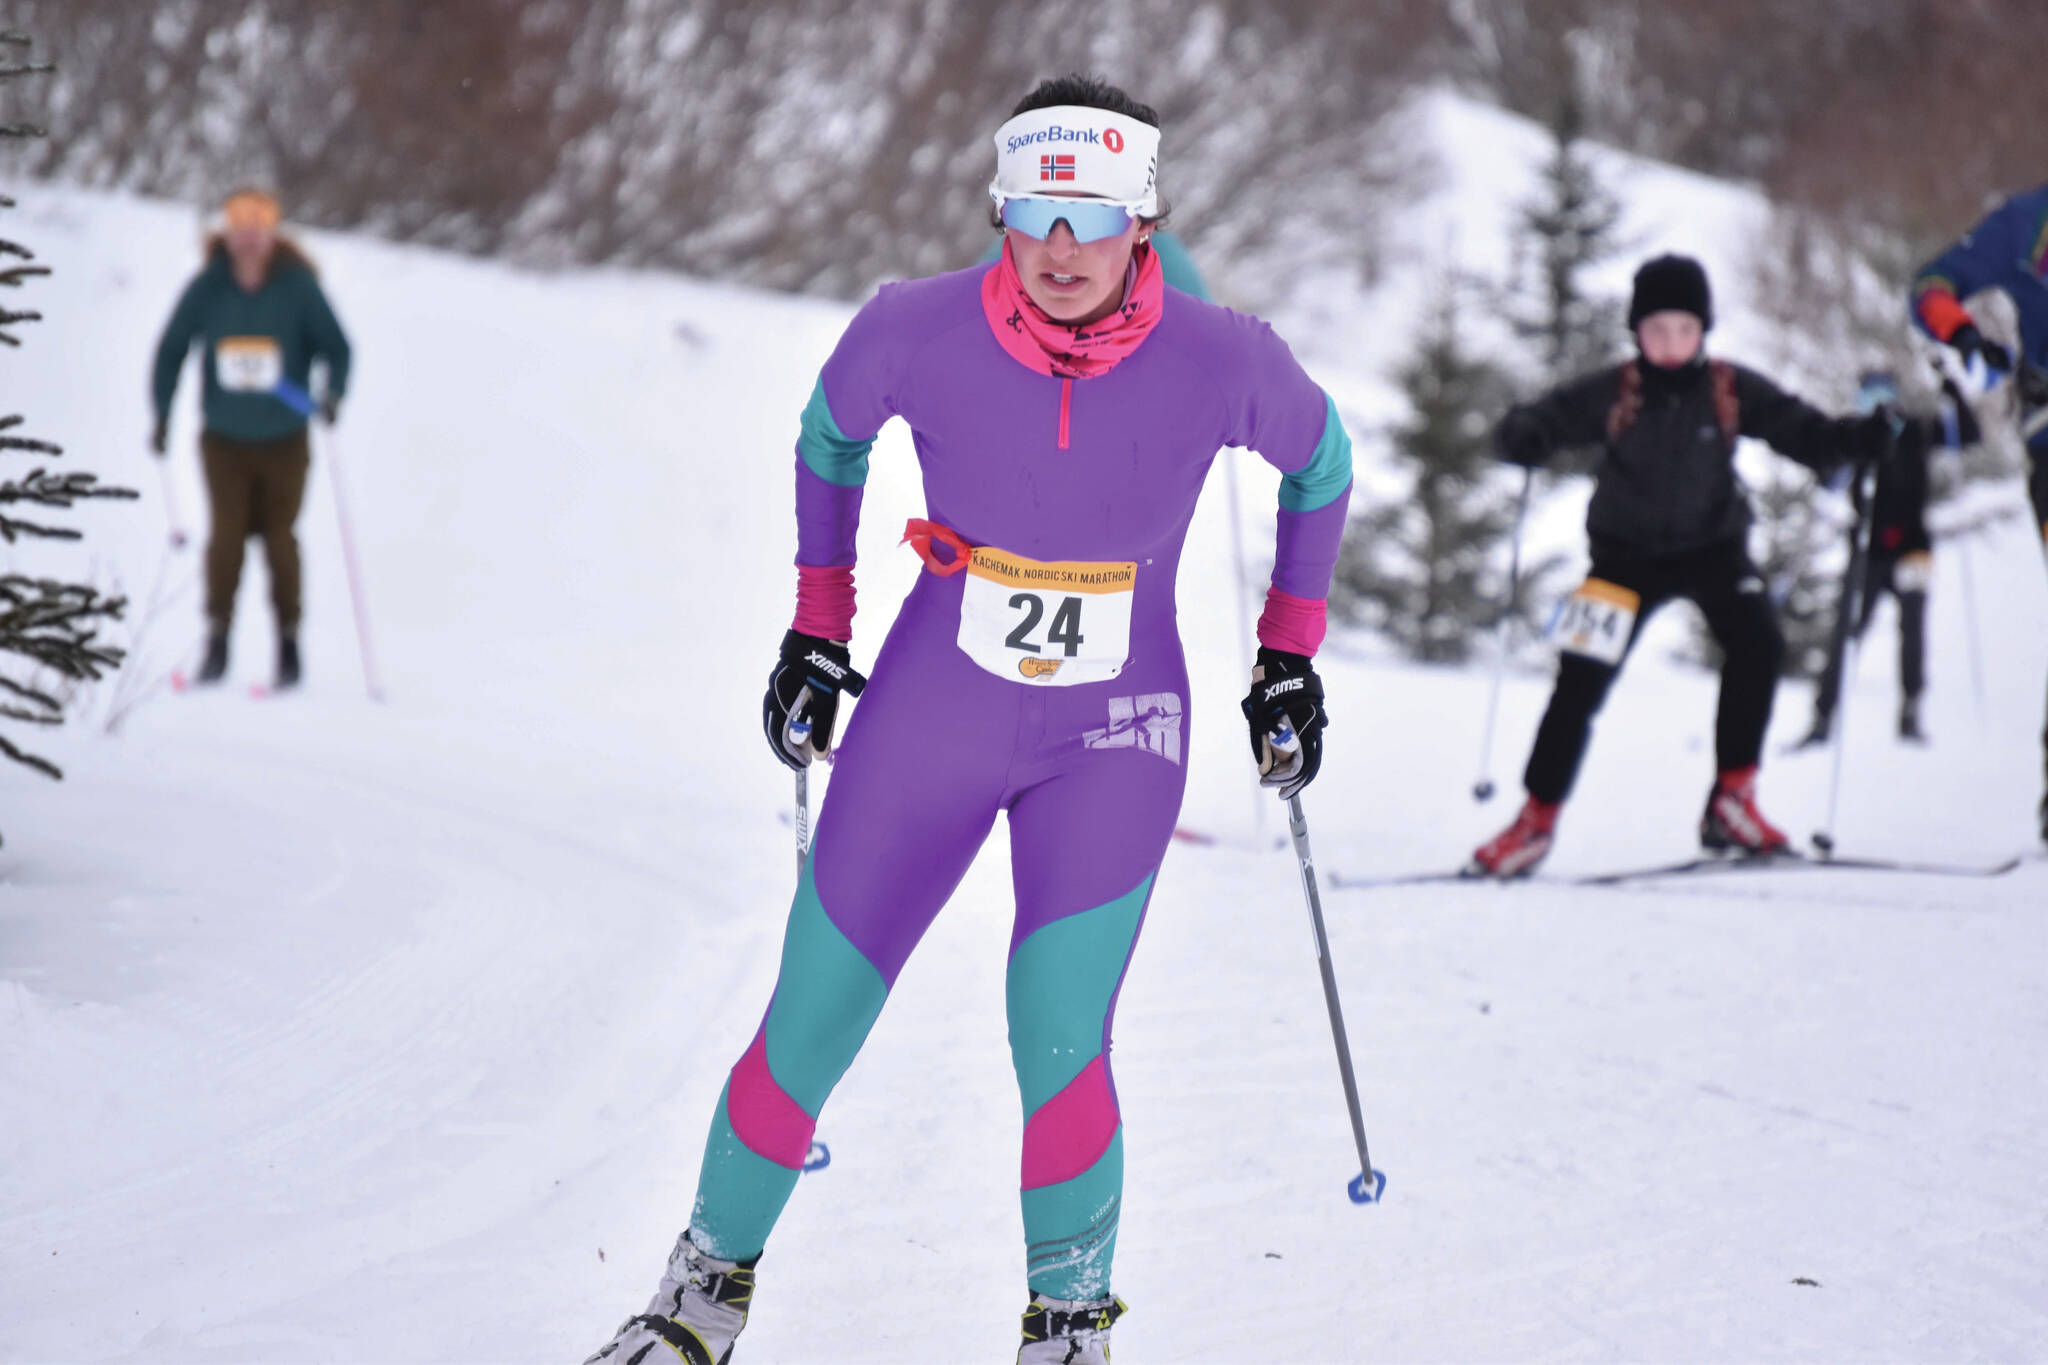 Anchorage's Jenna DiFolco skis to victory in the 42-kilometer women's race at the Kachemak Nordic Ski Marathon outside of Homer, Alaska, on Saturday, March 18, 2023. (Photo by Erin Thompson/Peninsula Clarion)